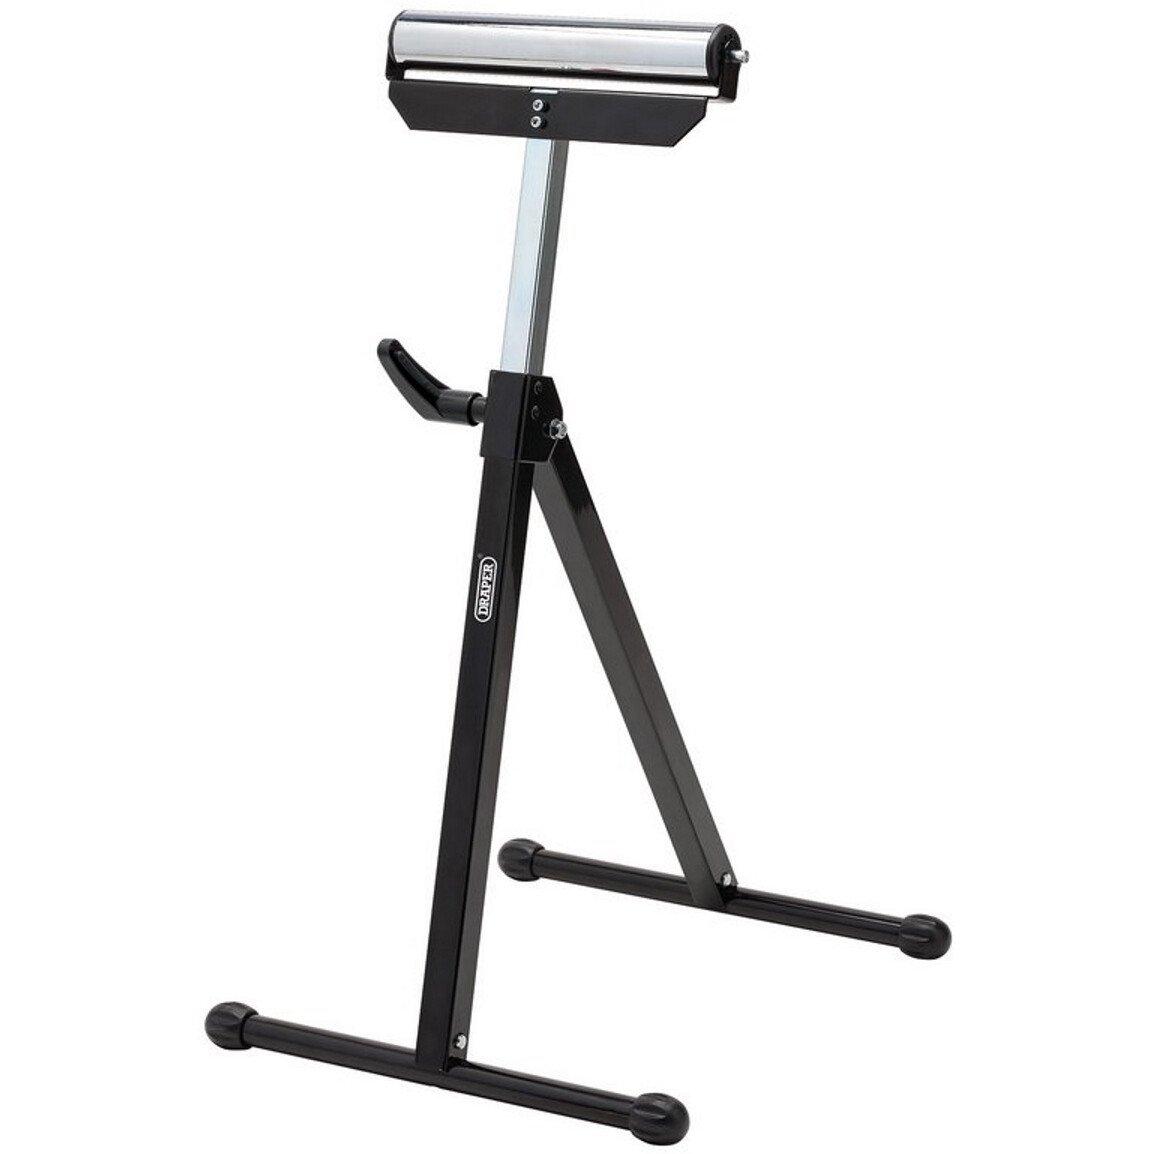 Draper 70273 RST310A 282mm Roller Stand